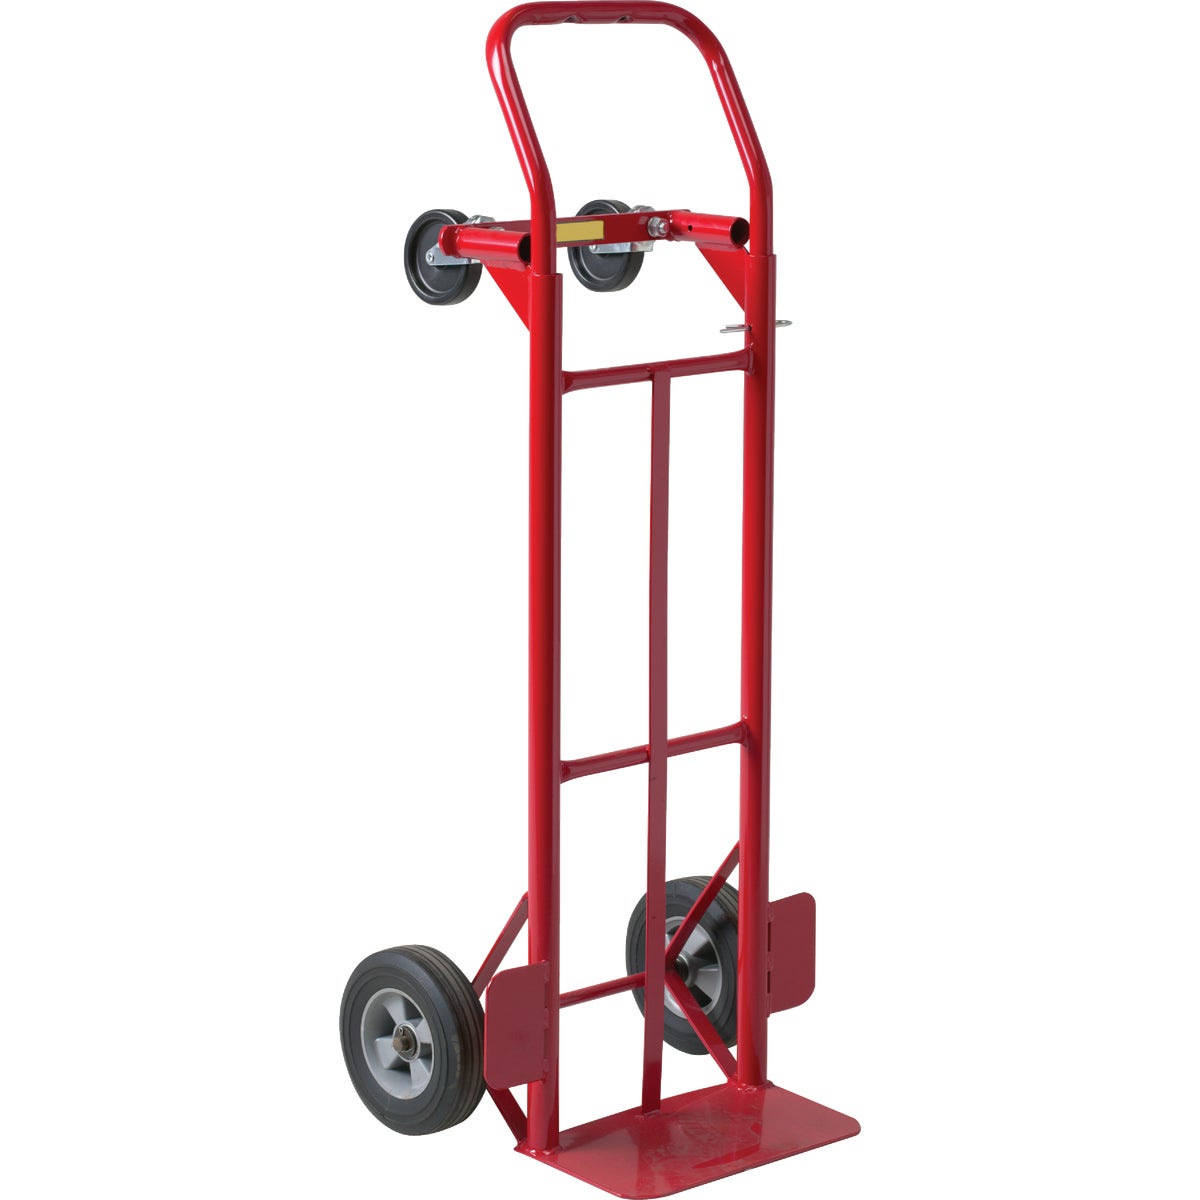 Item 708256, Hand truck featuring steel frame construction with flow back handle.